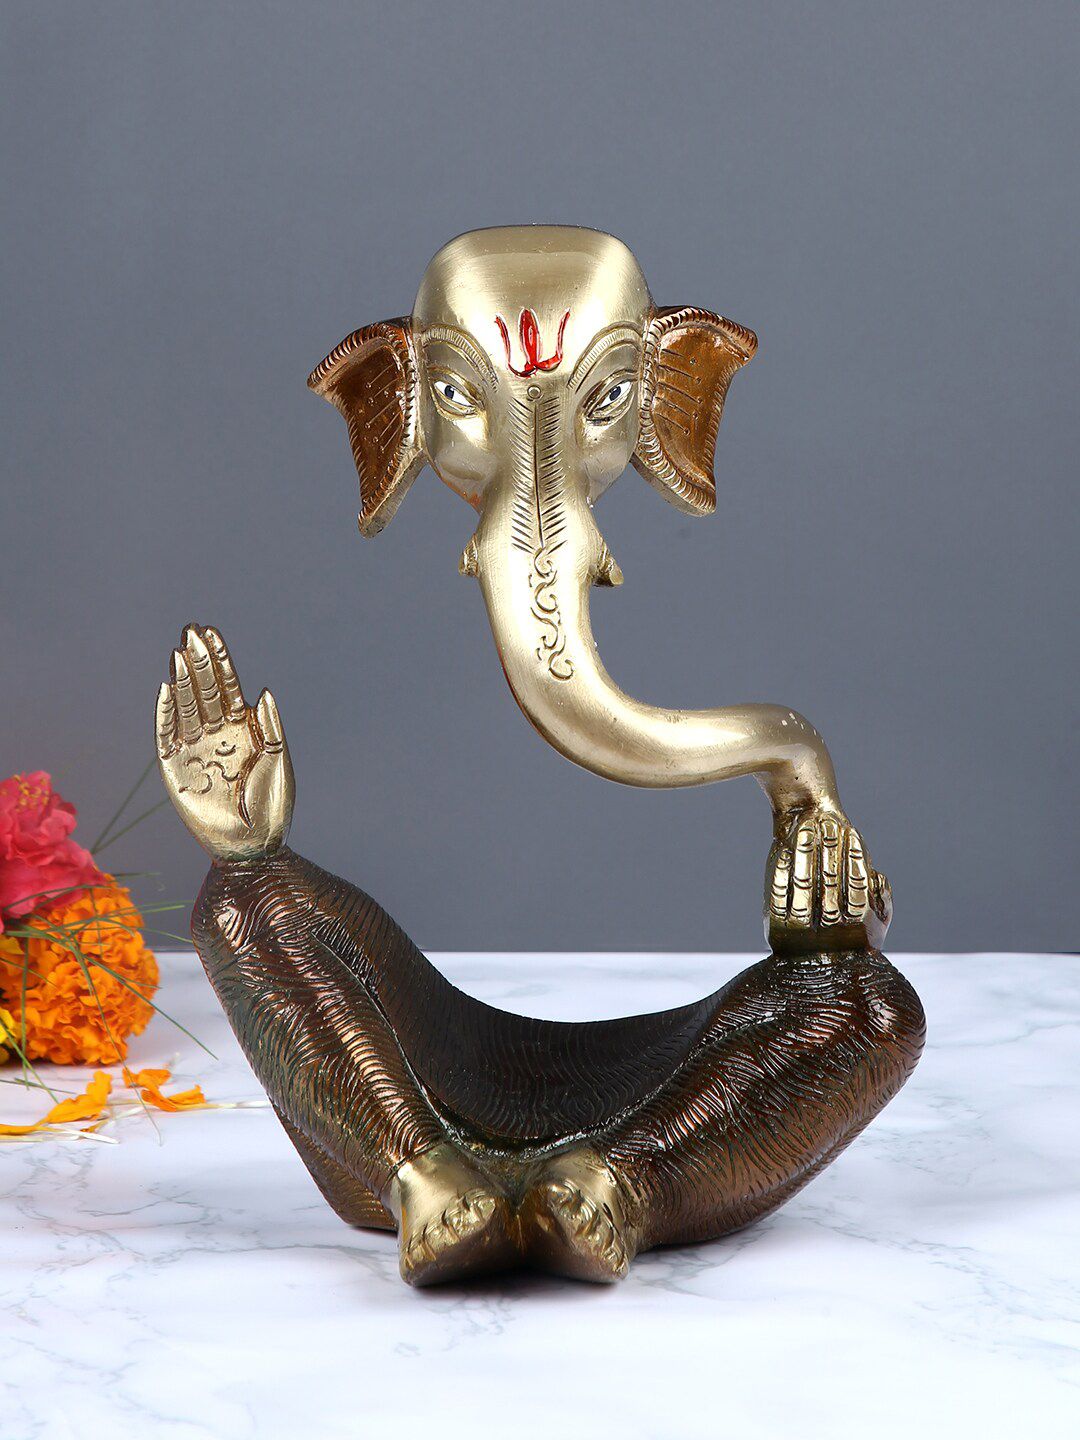 Aapno Rajasthan Brown & Gold-Toned Handcrafted Lord Ganesha Statue Price in India